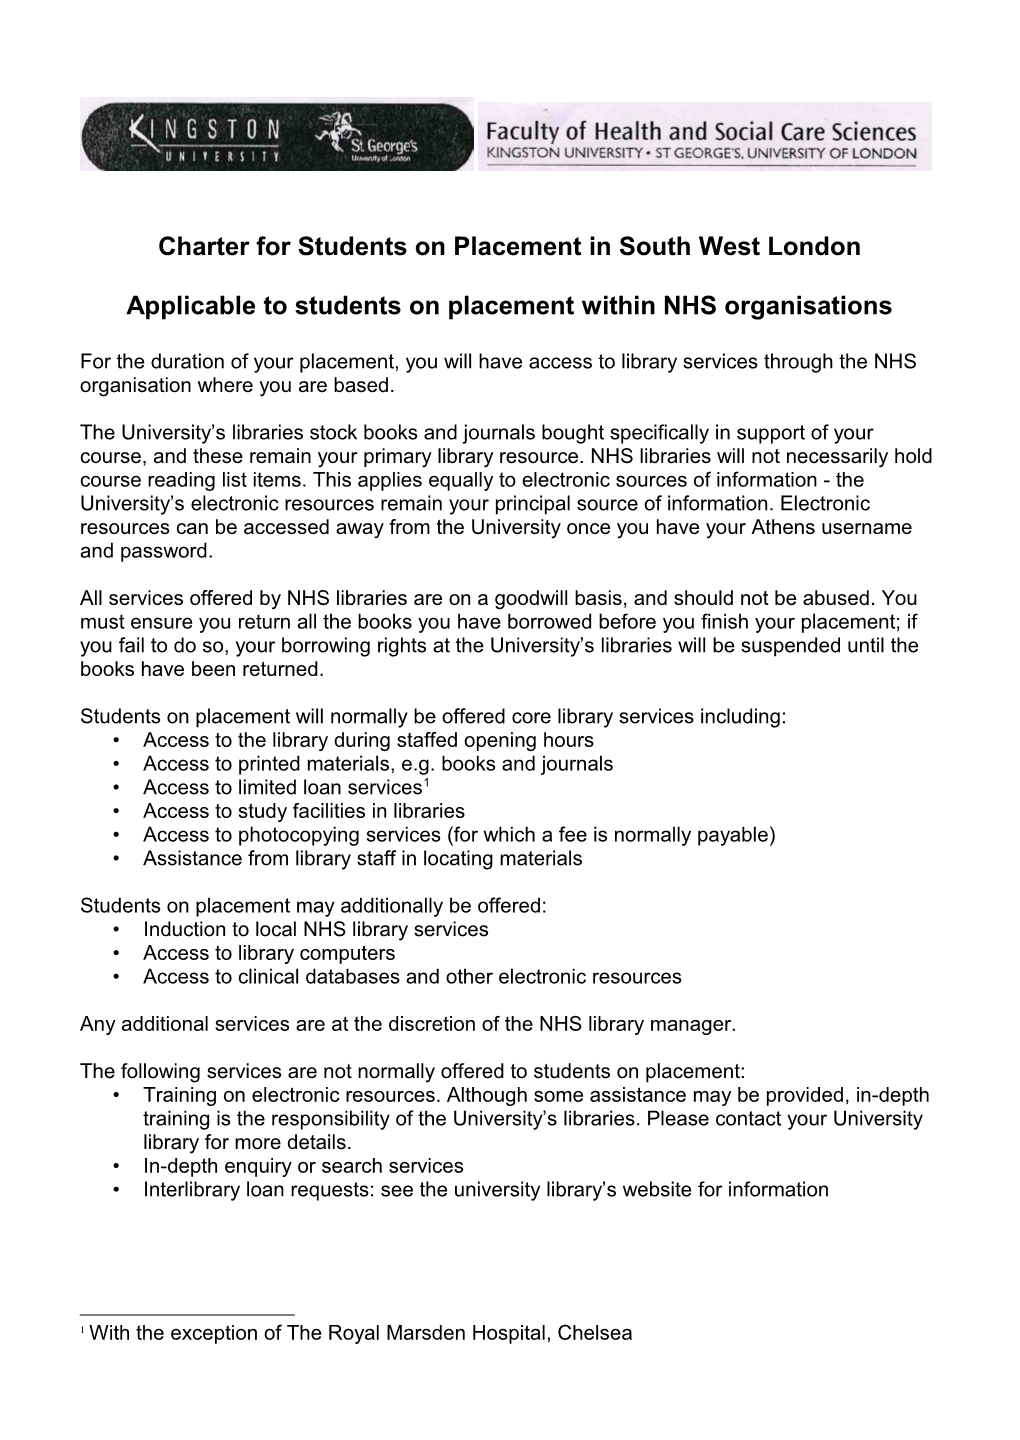 Charter for Students on Placement in South West London